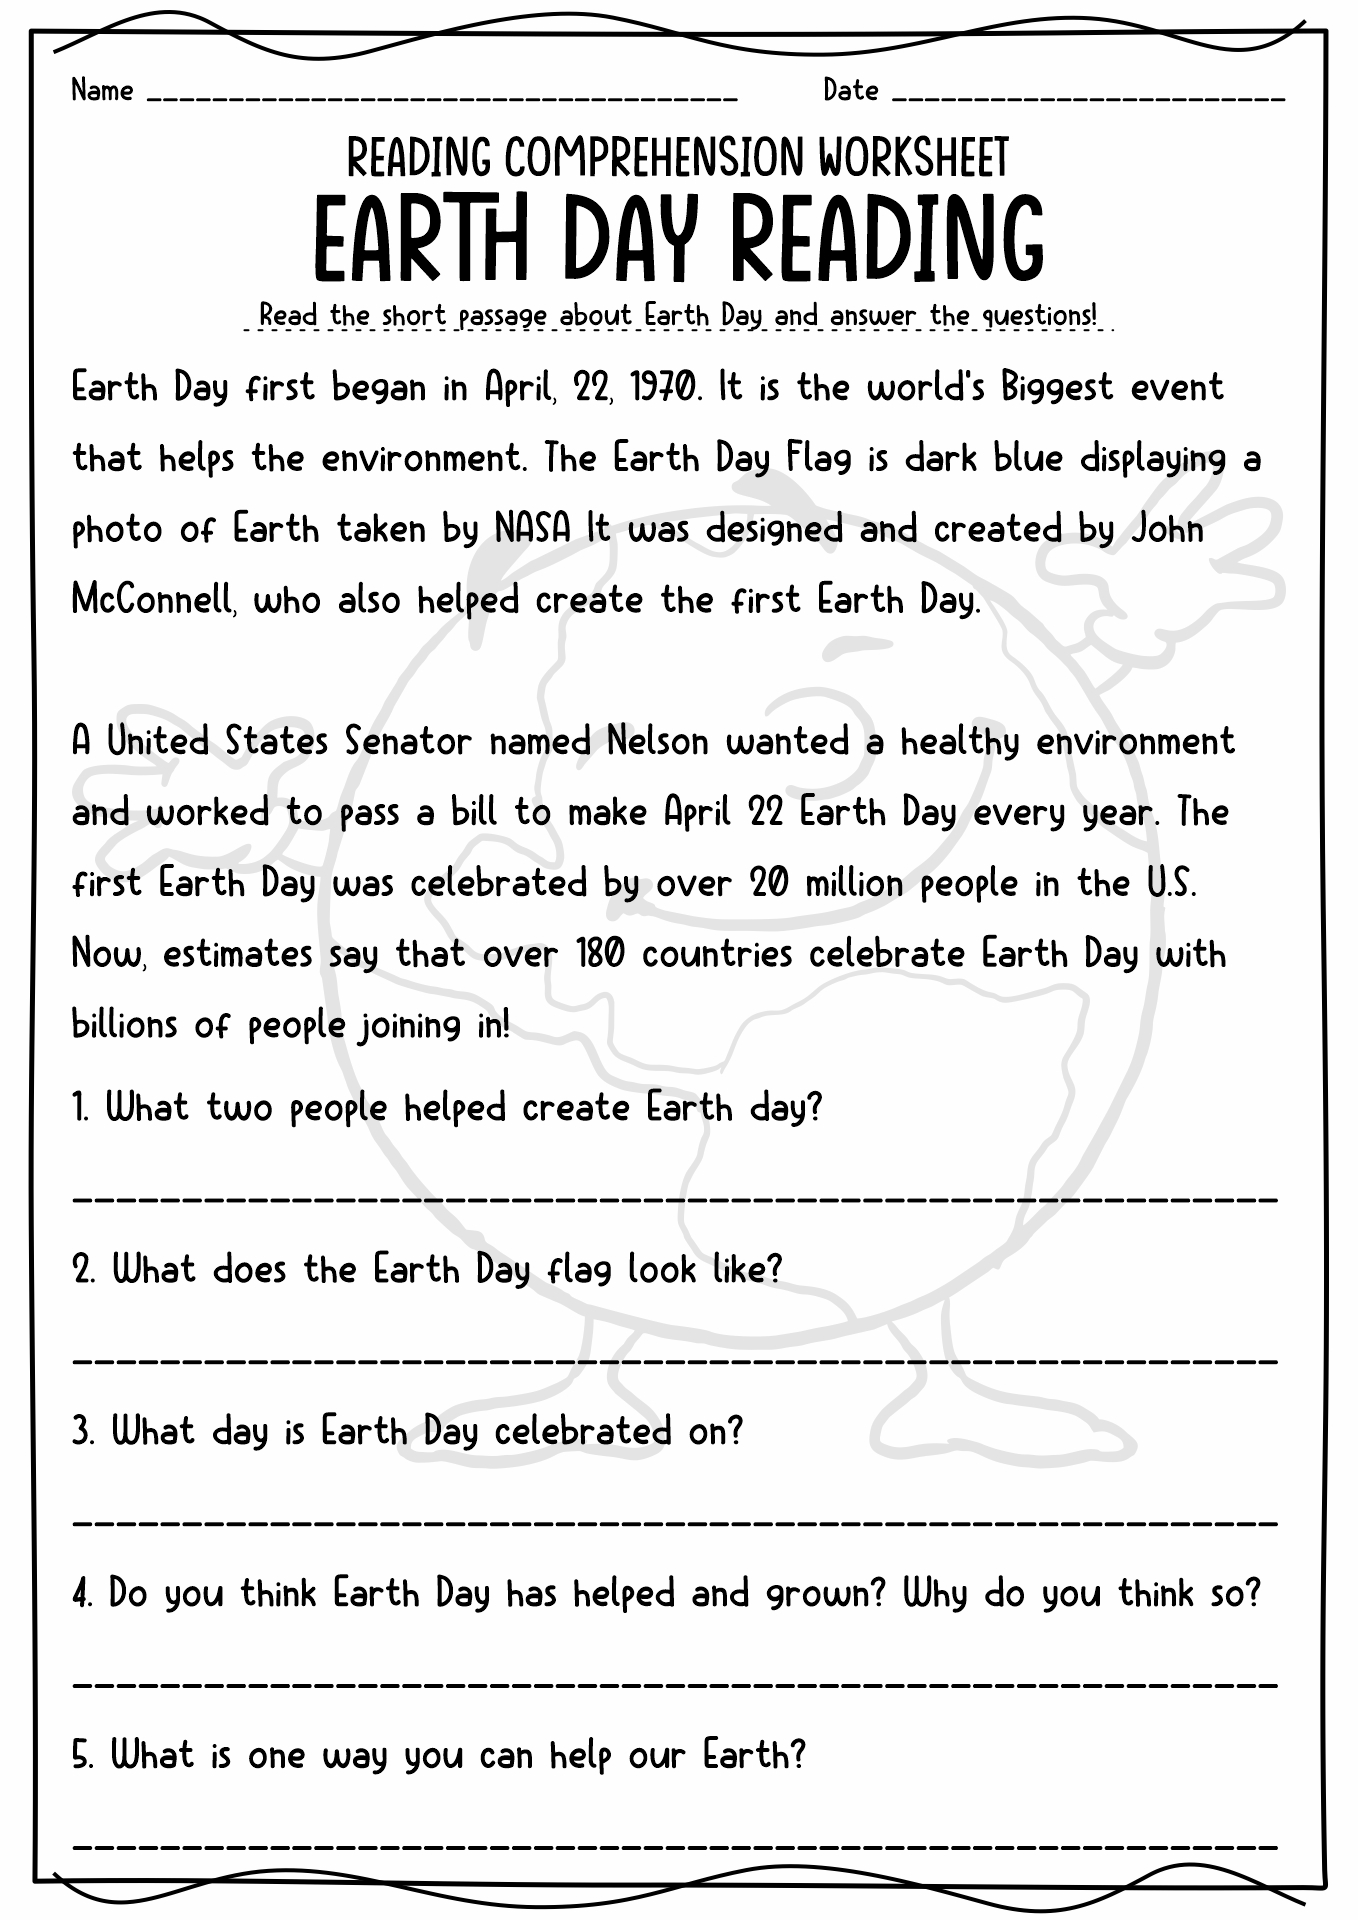 Earth Day Reading Comprehension Worksheets Image